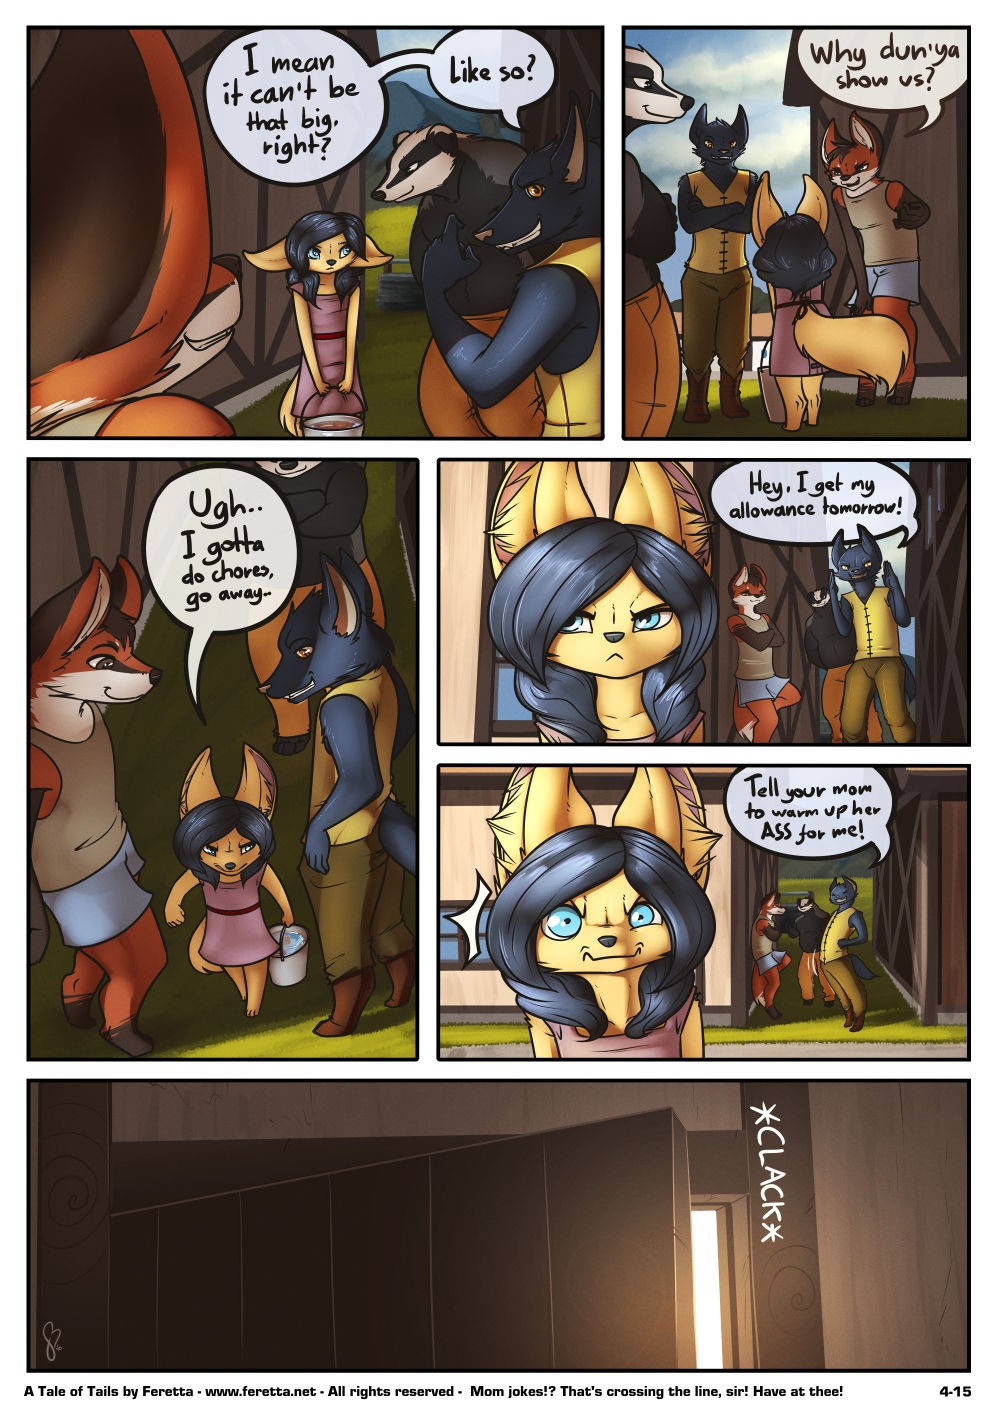 A Tale of Tails 4 - Matters of the mind porn comic picture 15